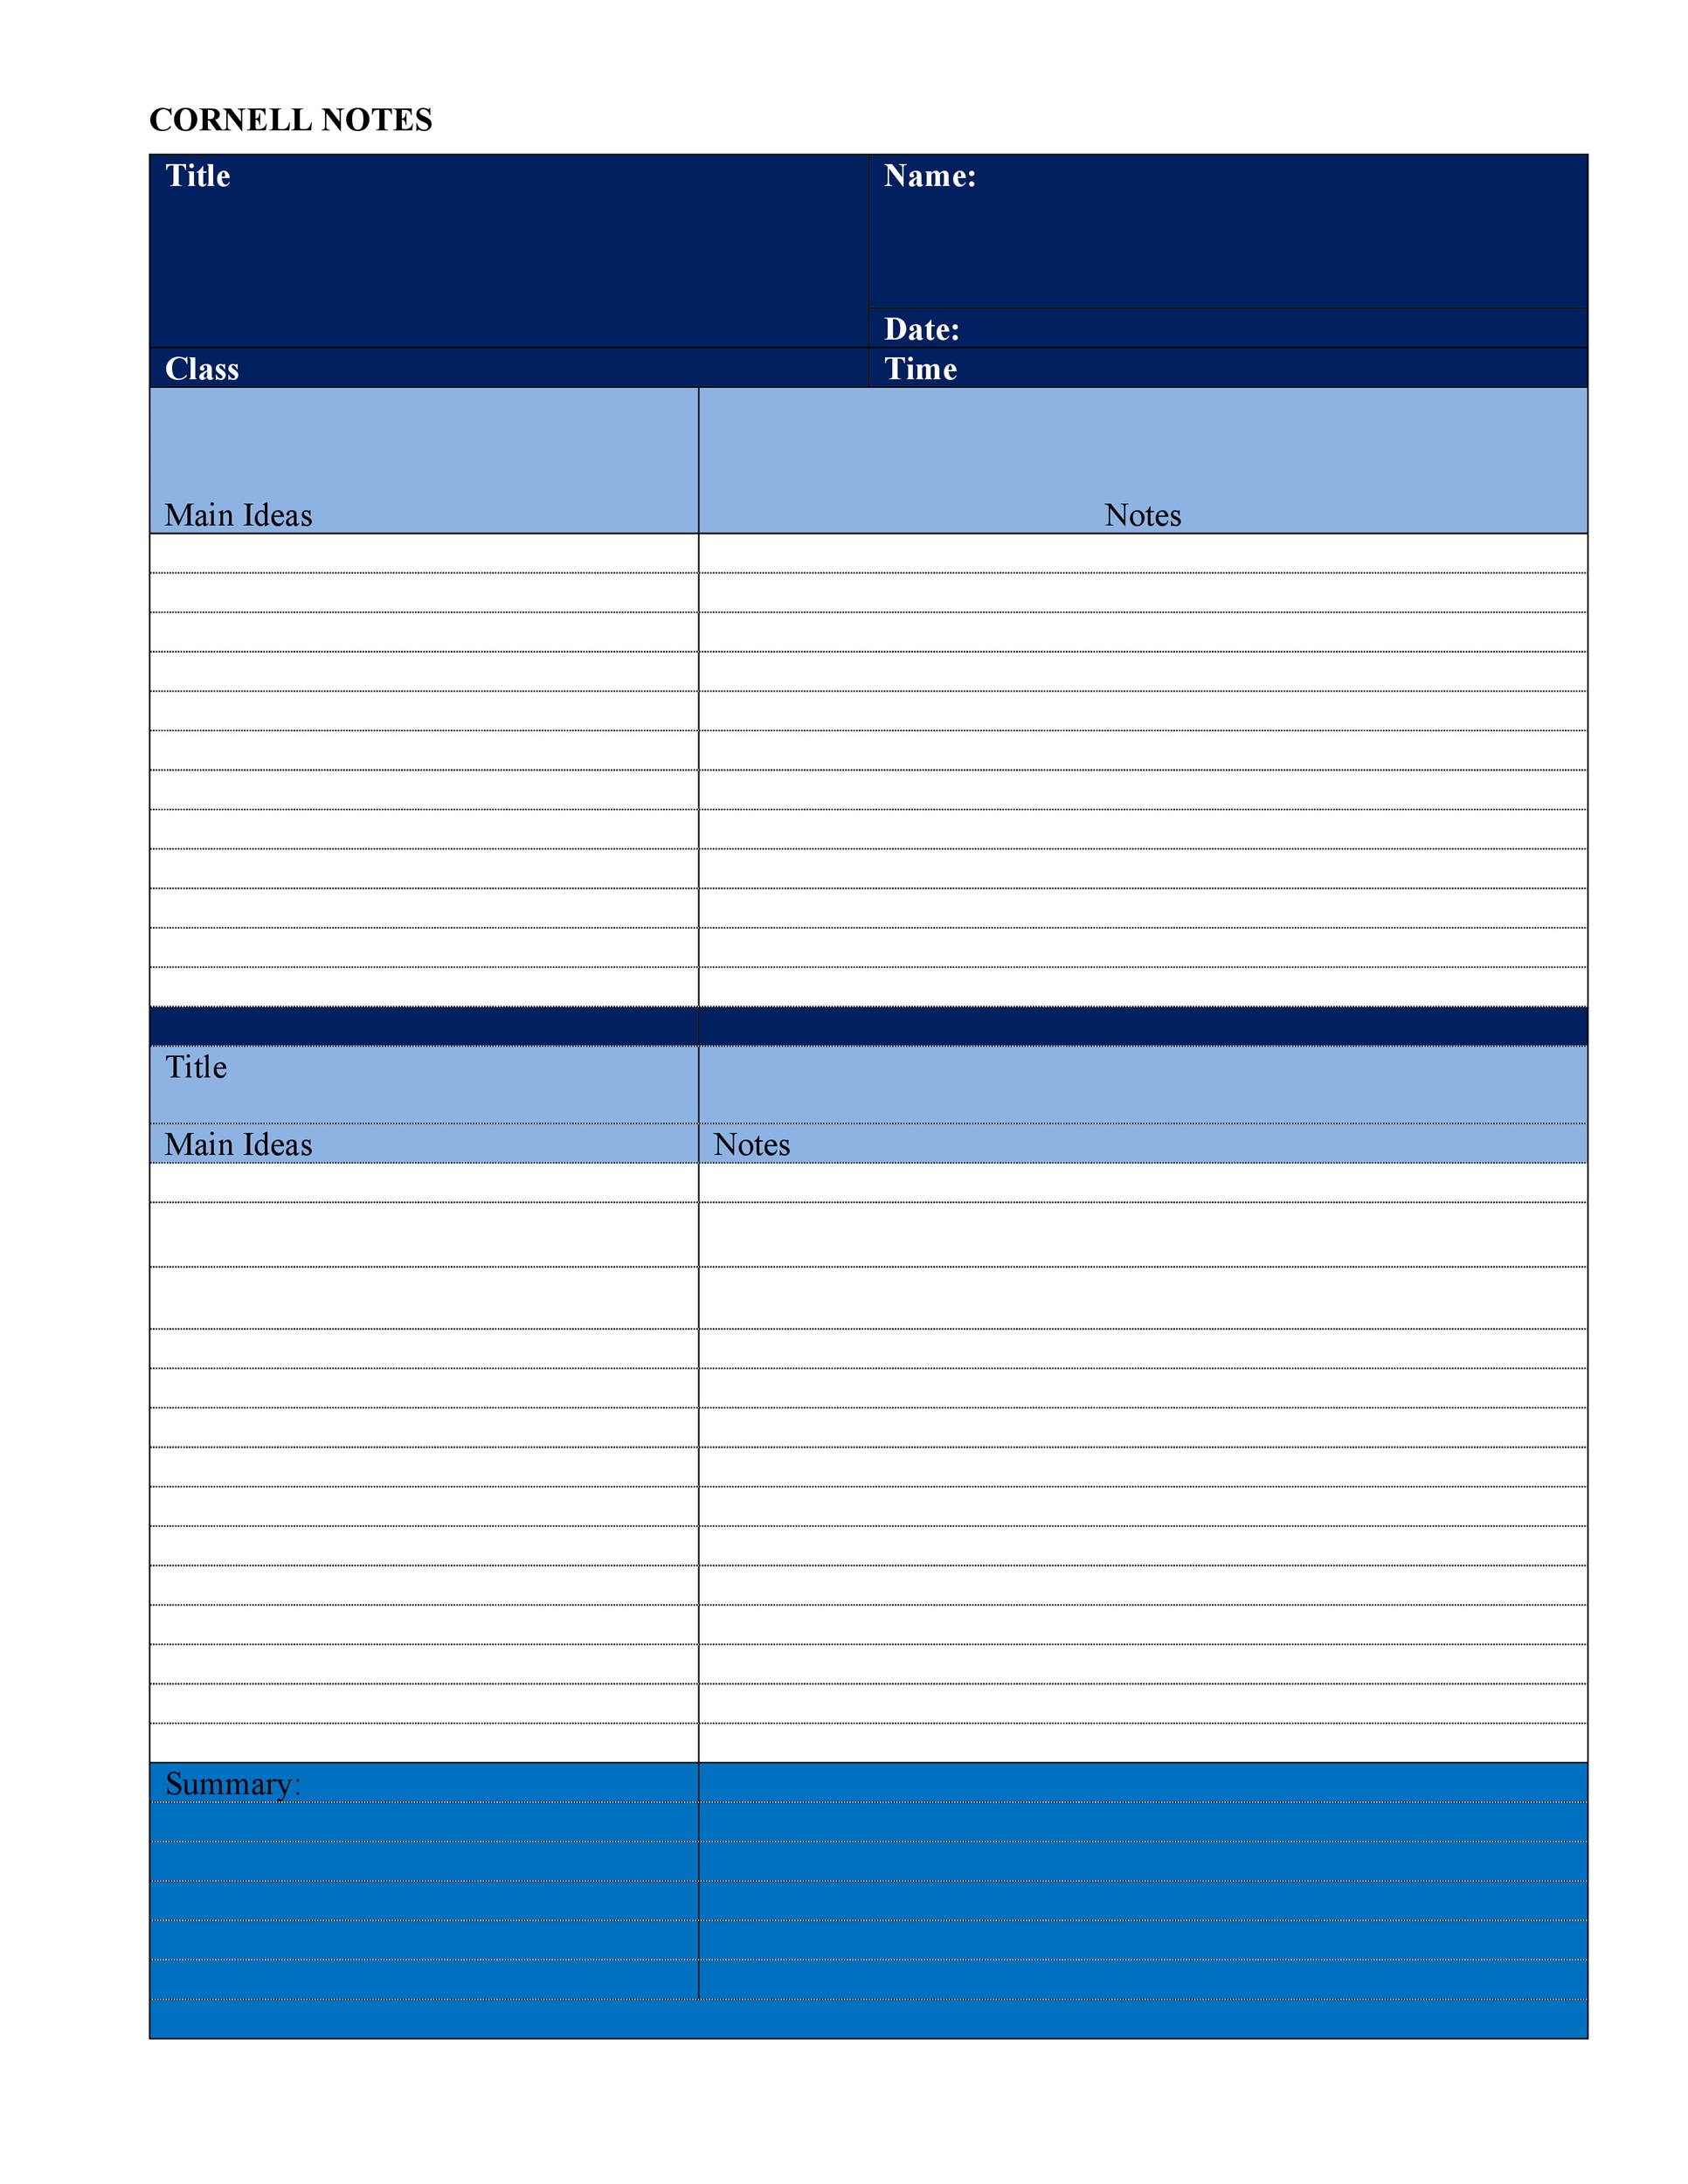 Free Cornell Notes Template 17